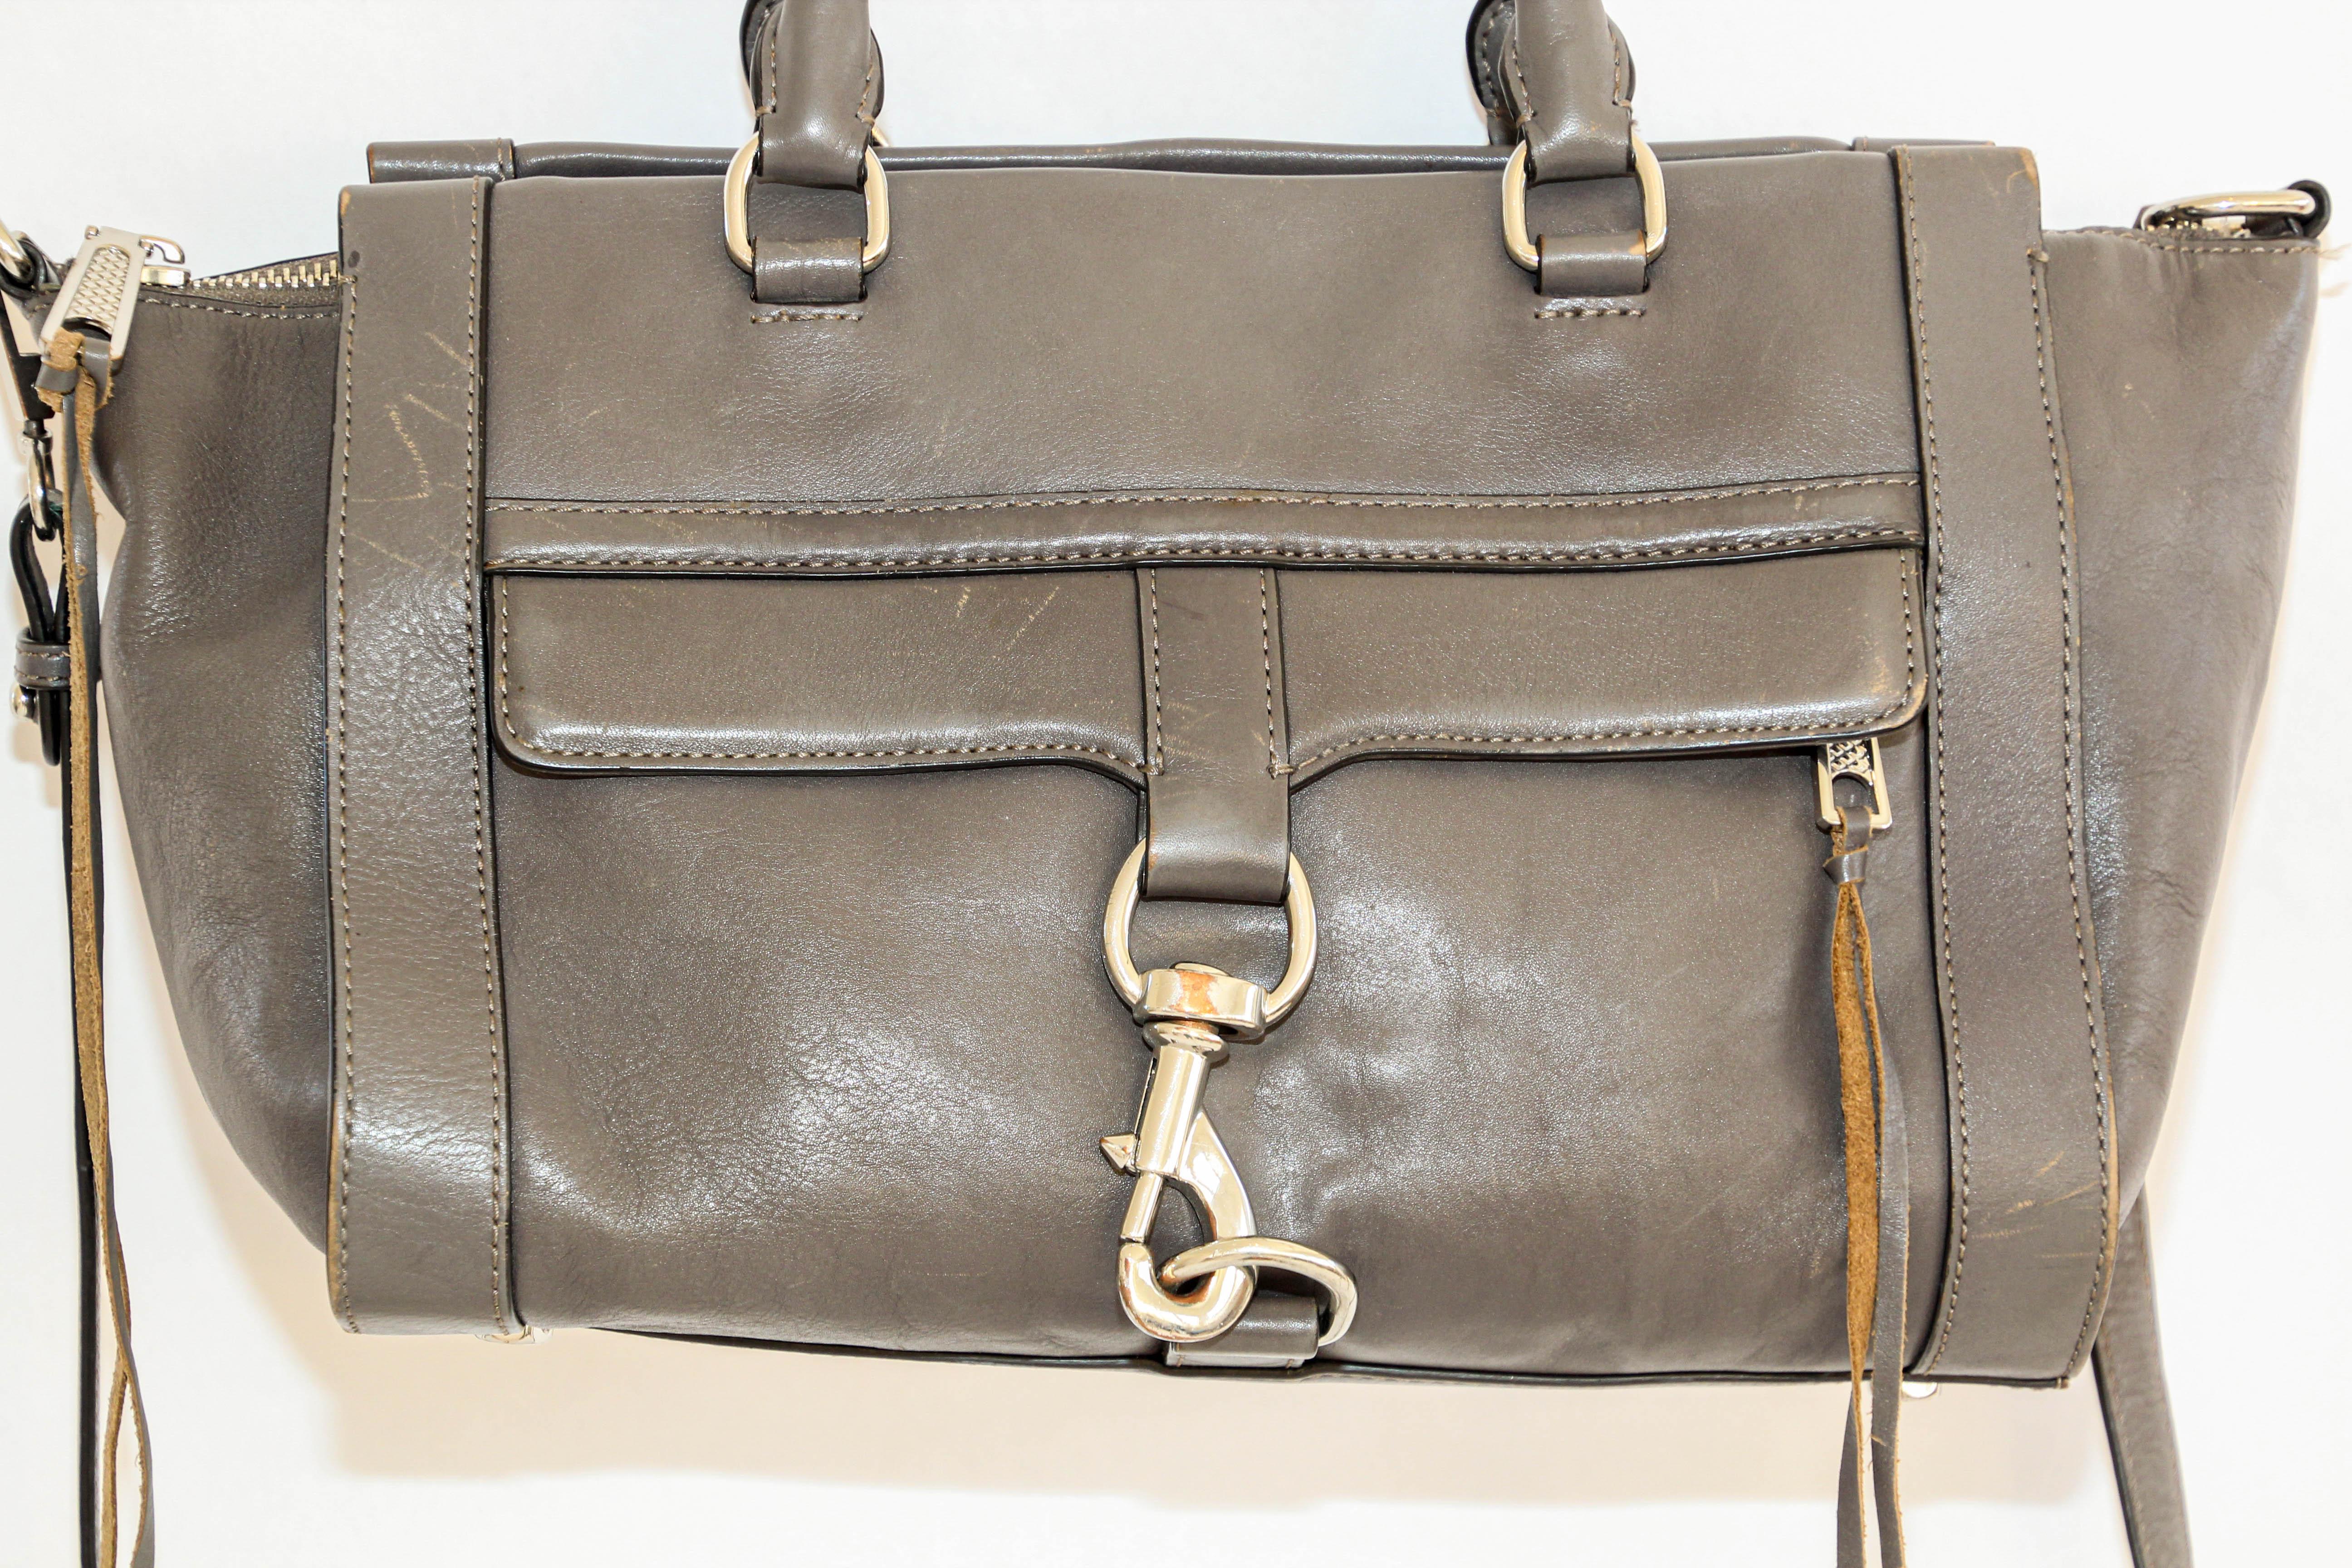 Rebecca Minkoff Large Grey Leather Bag Bowery Satchel.
Made from a genuine leather, the Rebecca Minkoff Bowery satchel features a detachable shoulder strap with twin grab handles. The leather satchel has a top zip fastening which conceals a